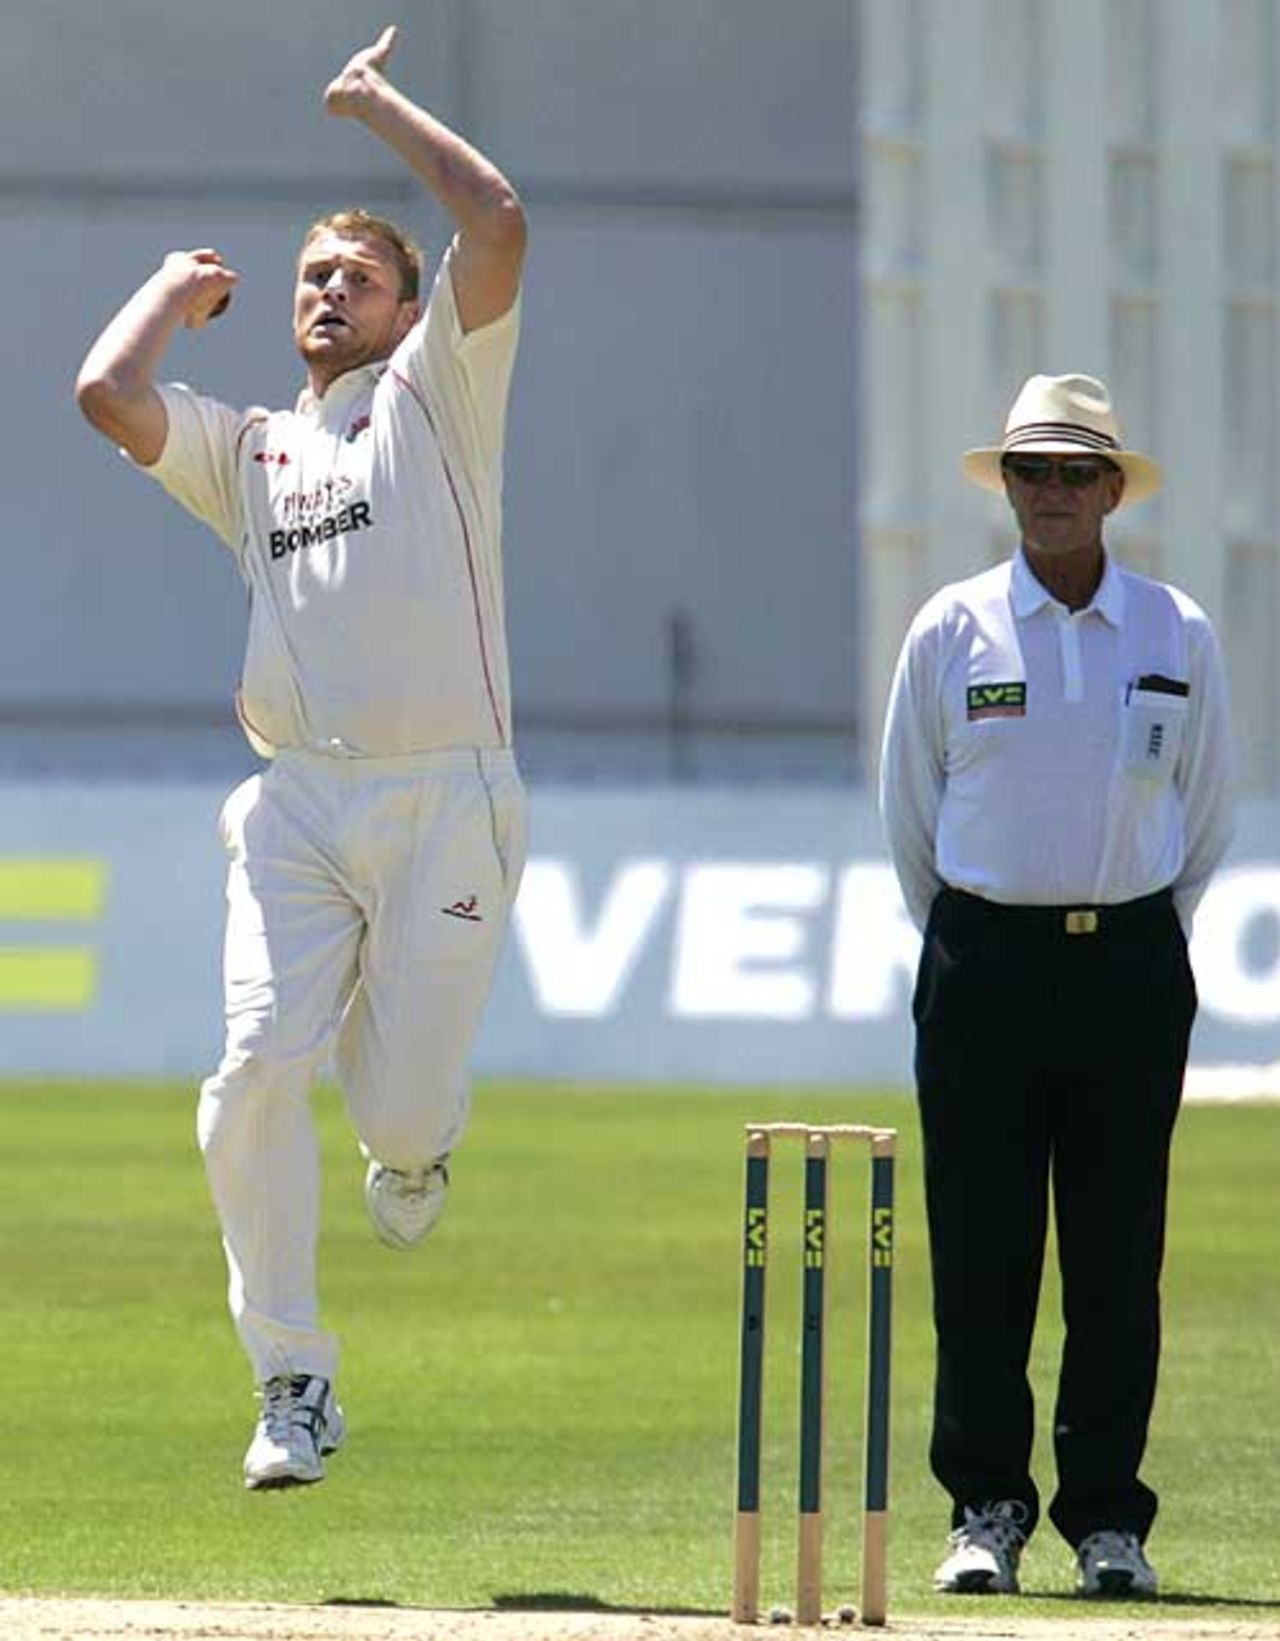 Andrew Flintoff in action against Sussex, Sussex v Lancashire, County Championship, Hove, 1st day, June 29, 2008